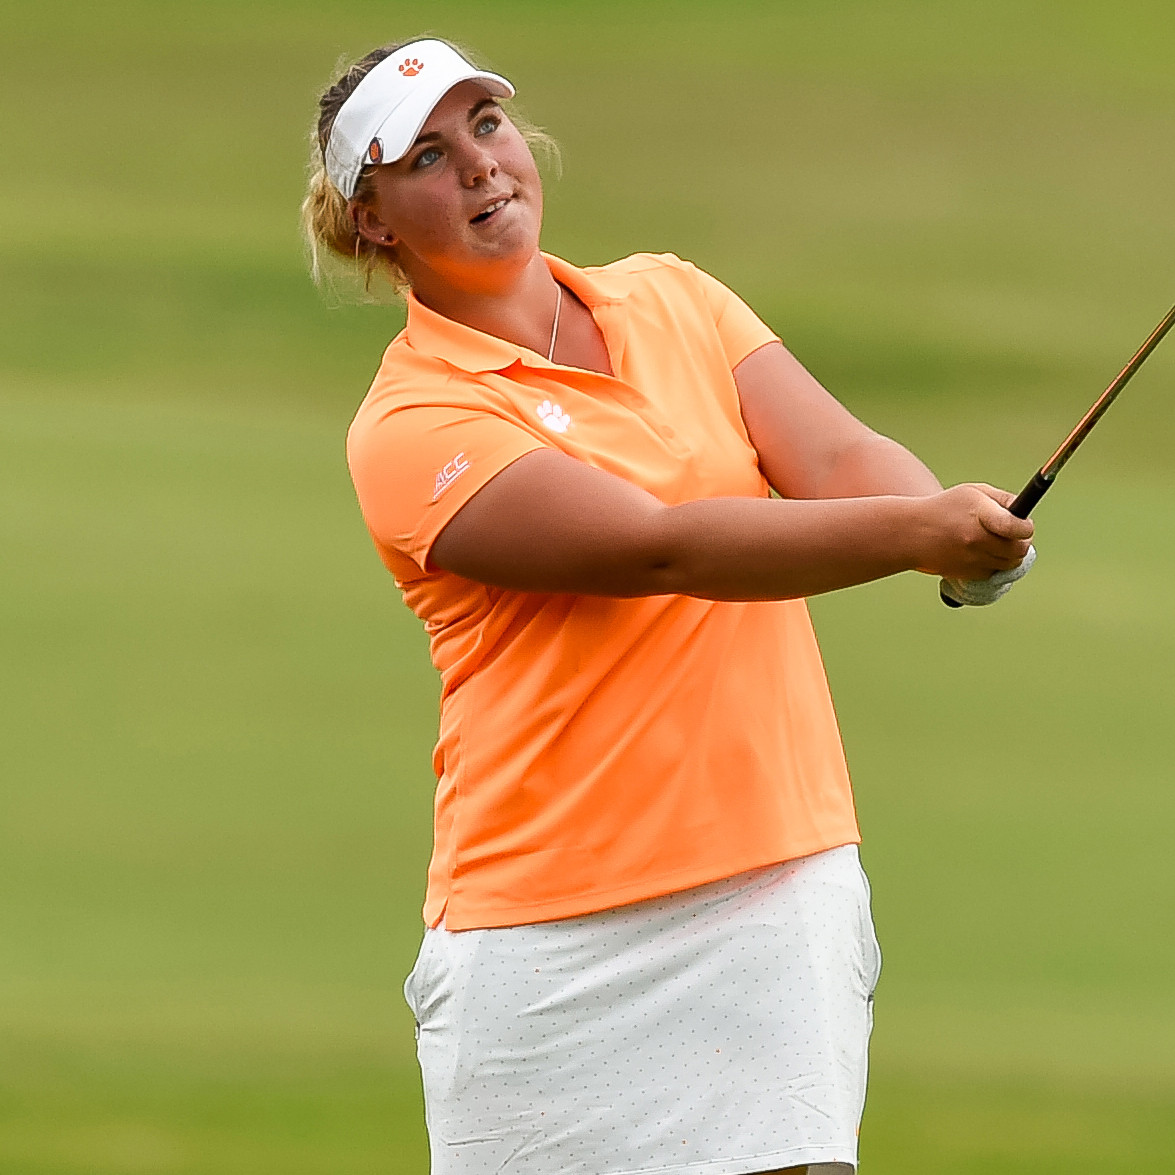 Clemson Women 8th after Two Rounds at LSU